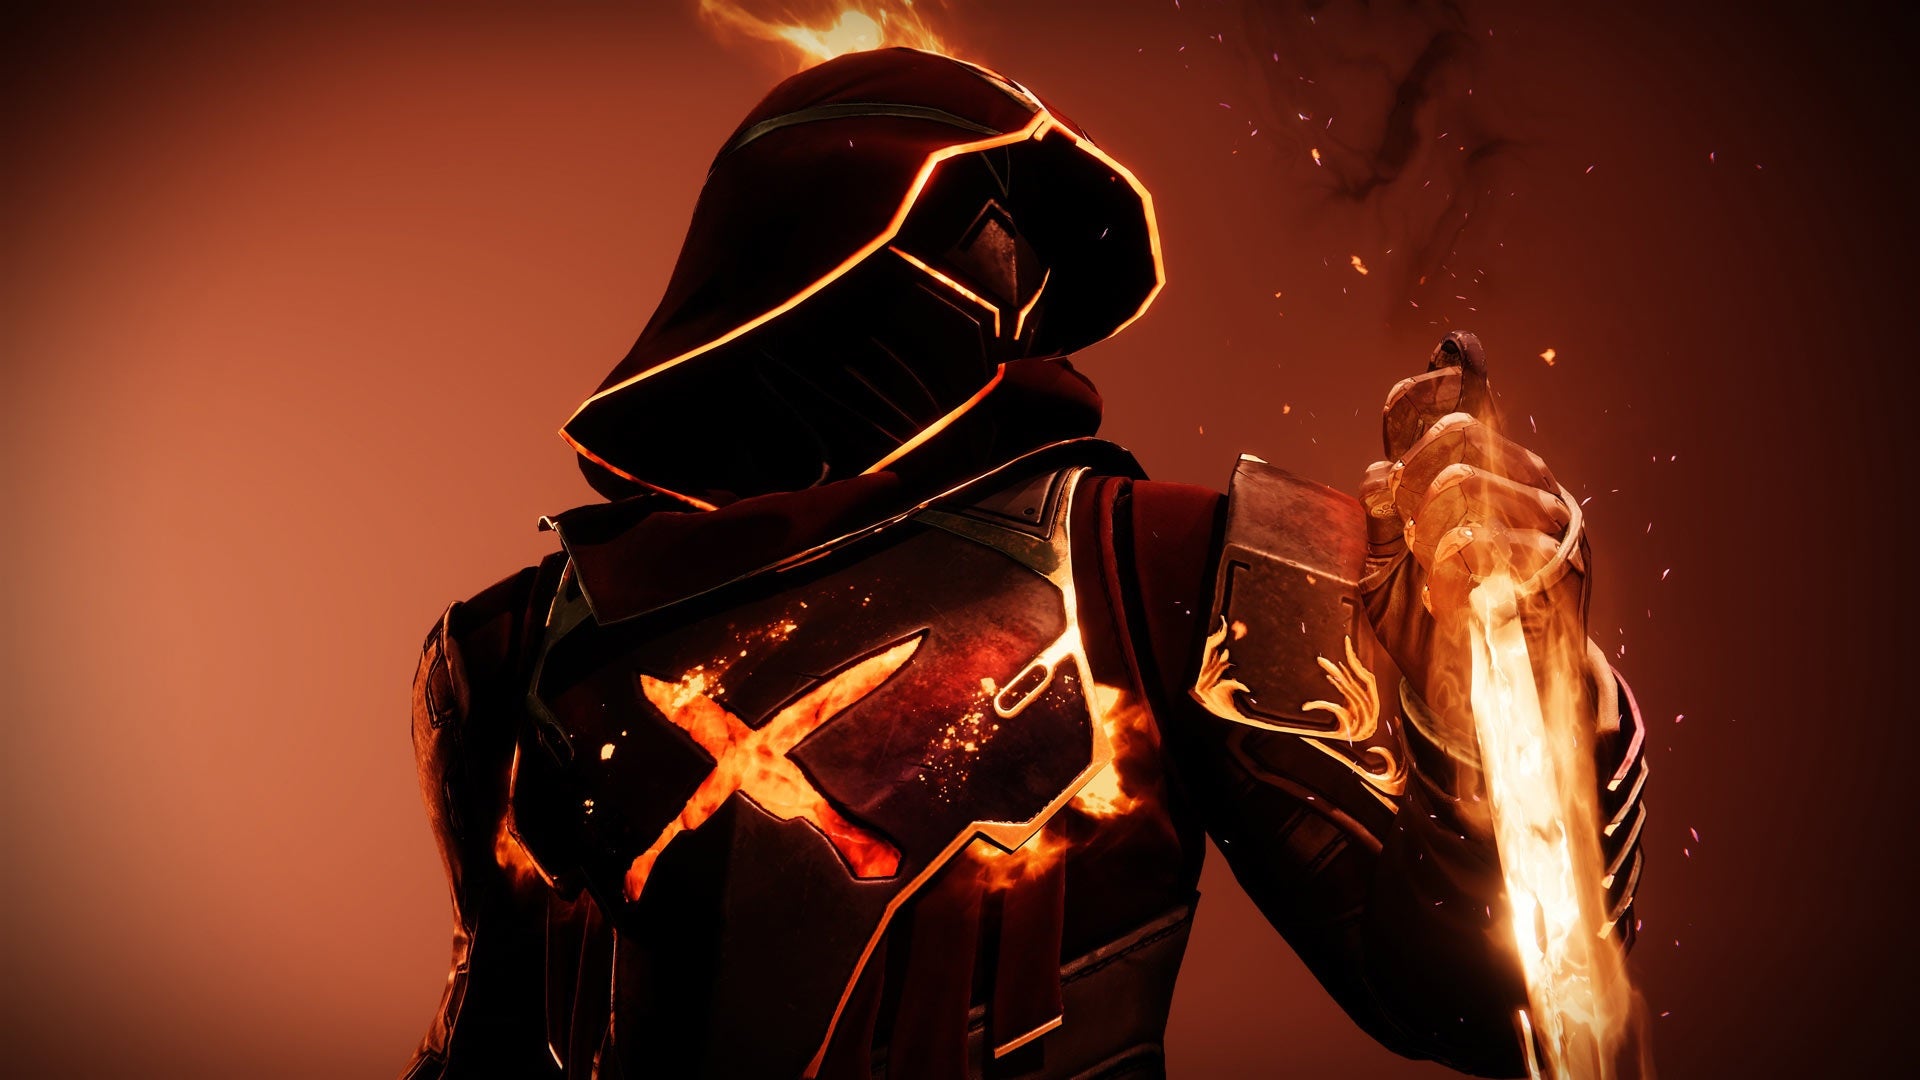 The hunter with solar.3.0 on in Destiny 2